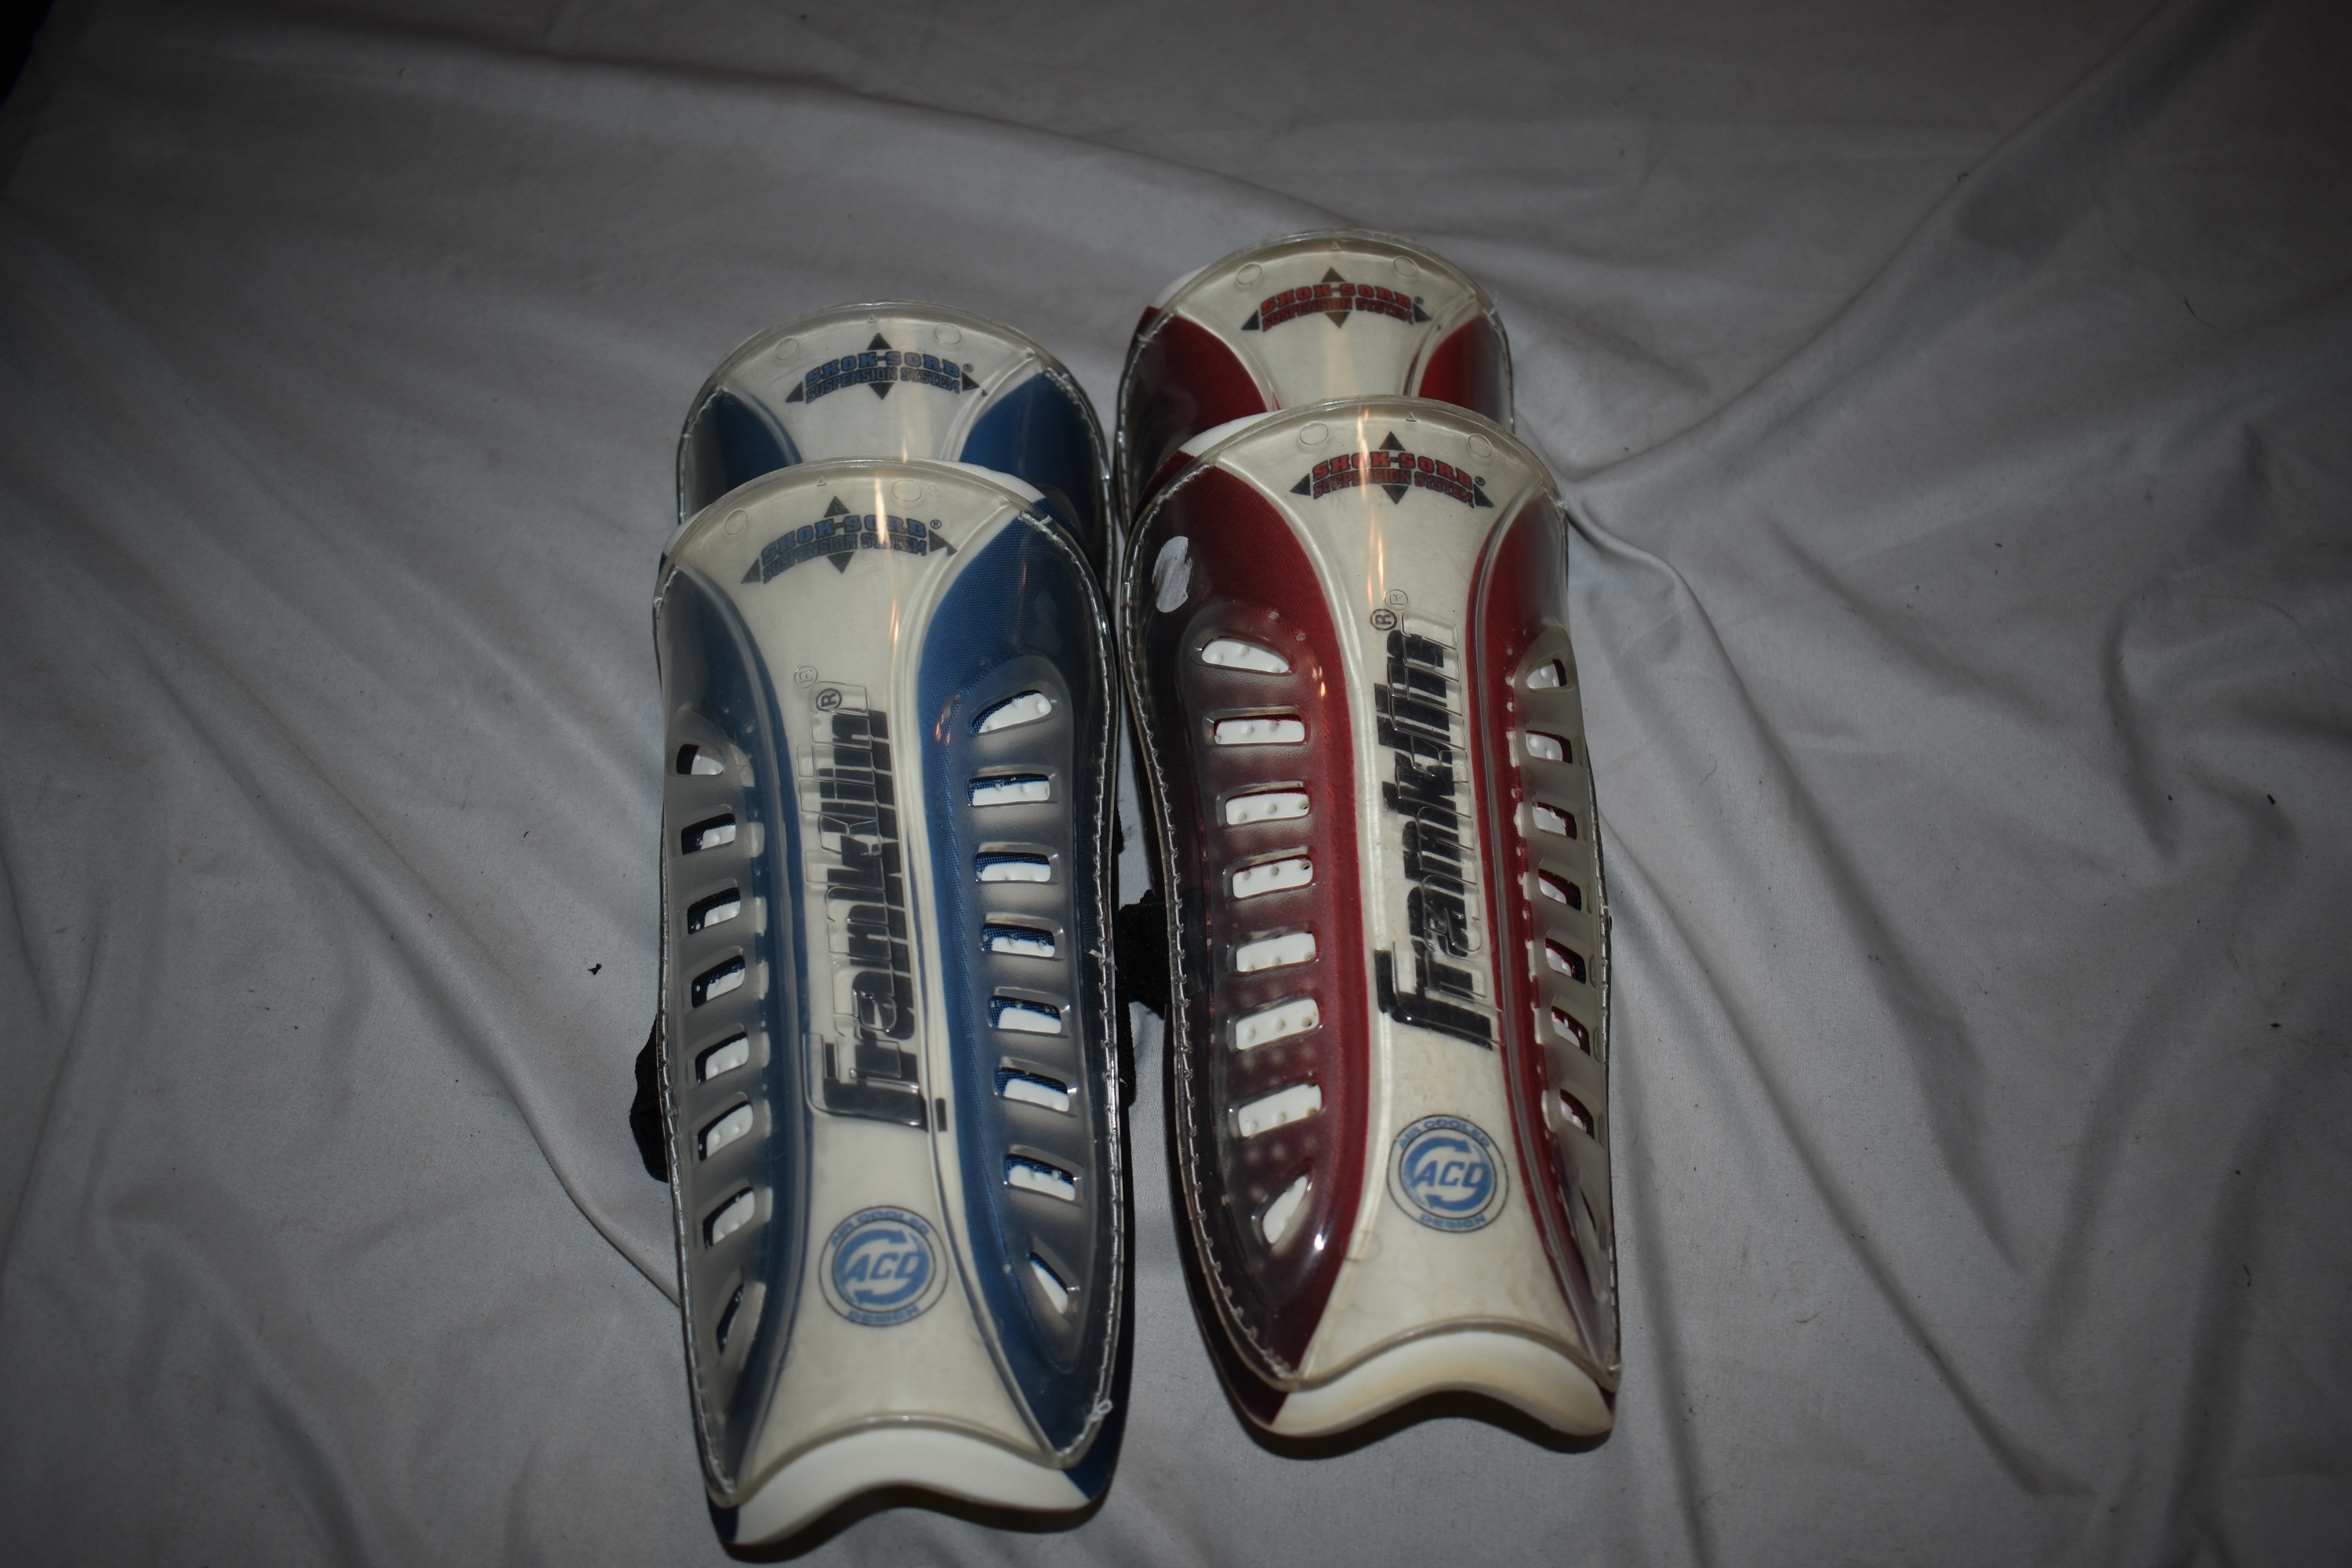 Franklin Soccer Shin Guards, 2 Pair, Red and Blue